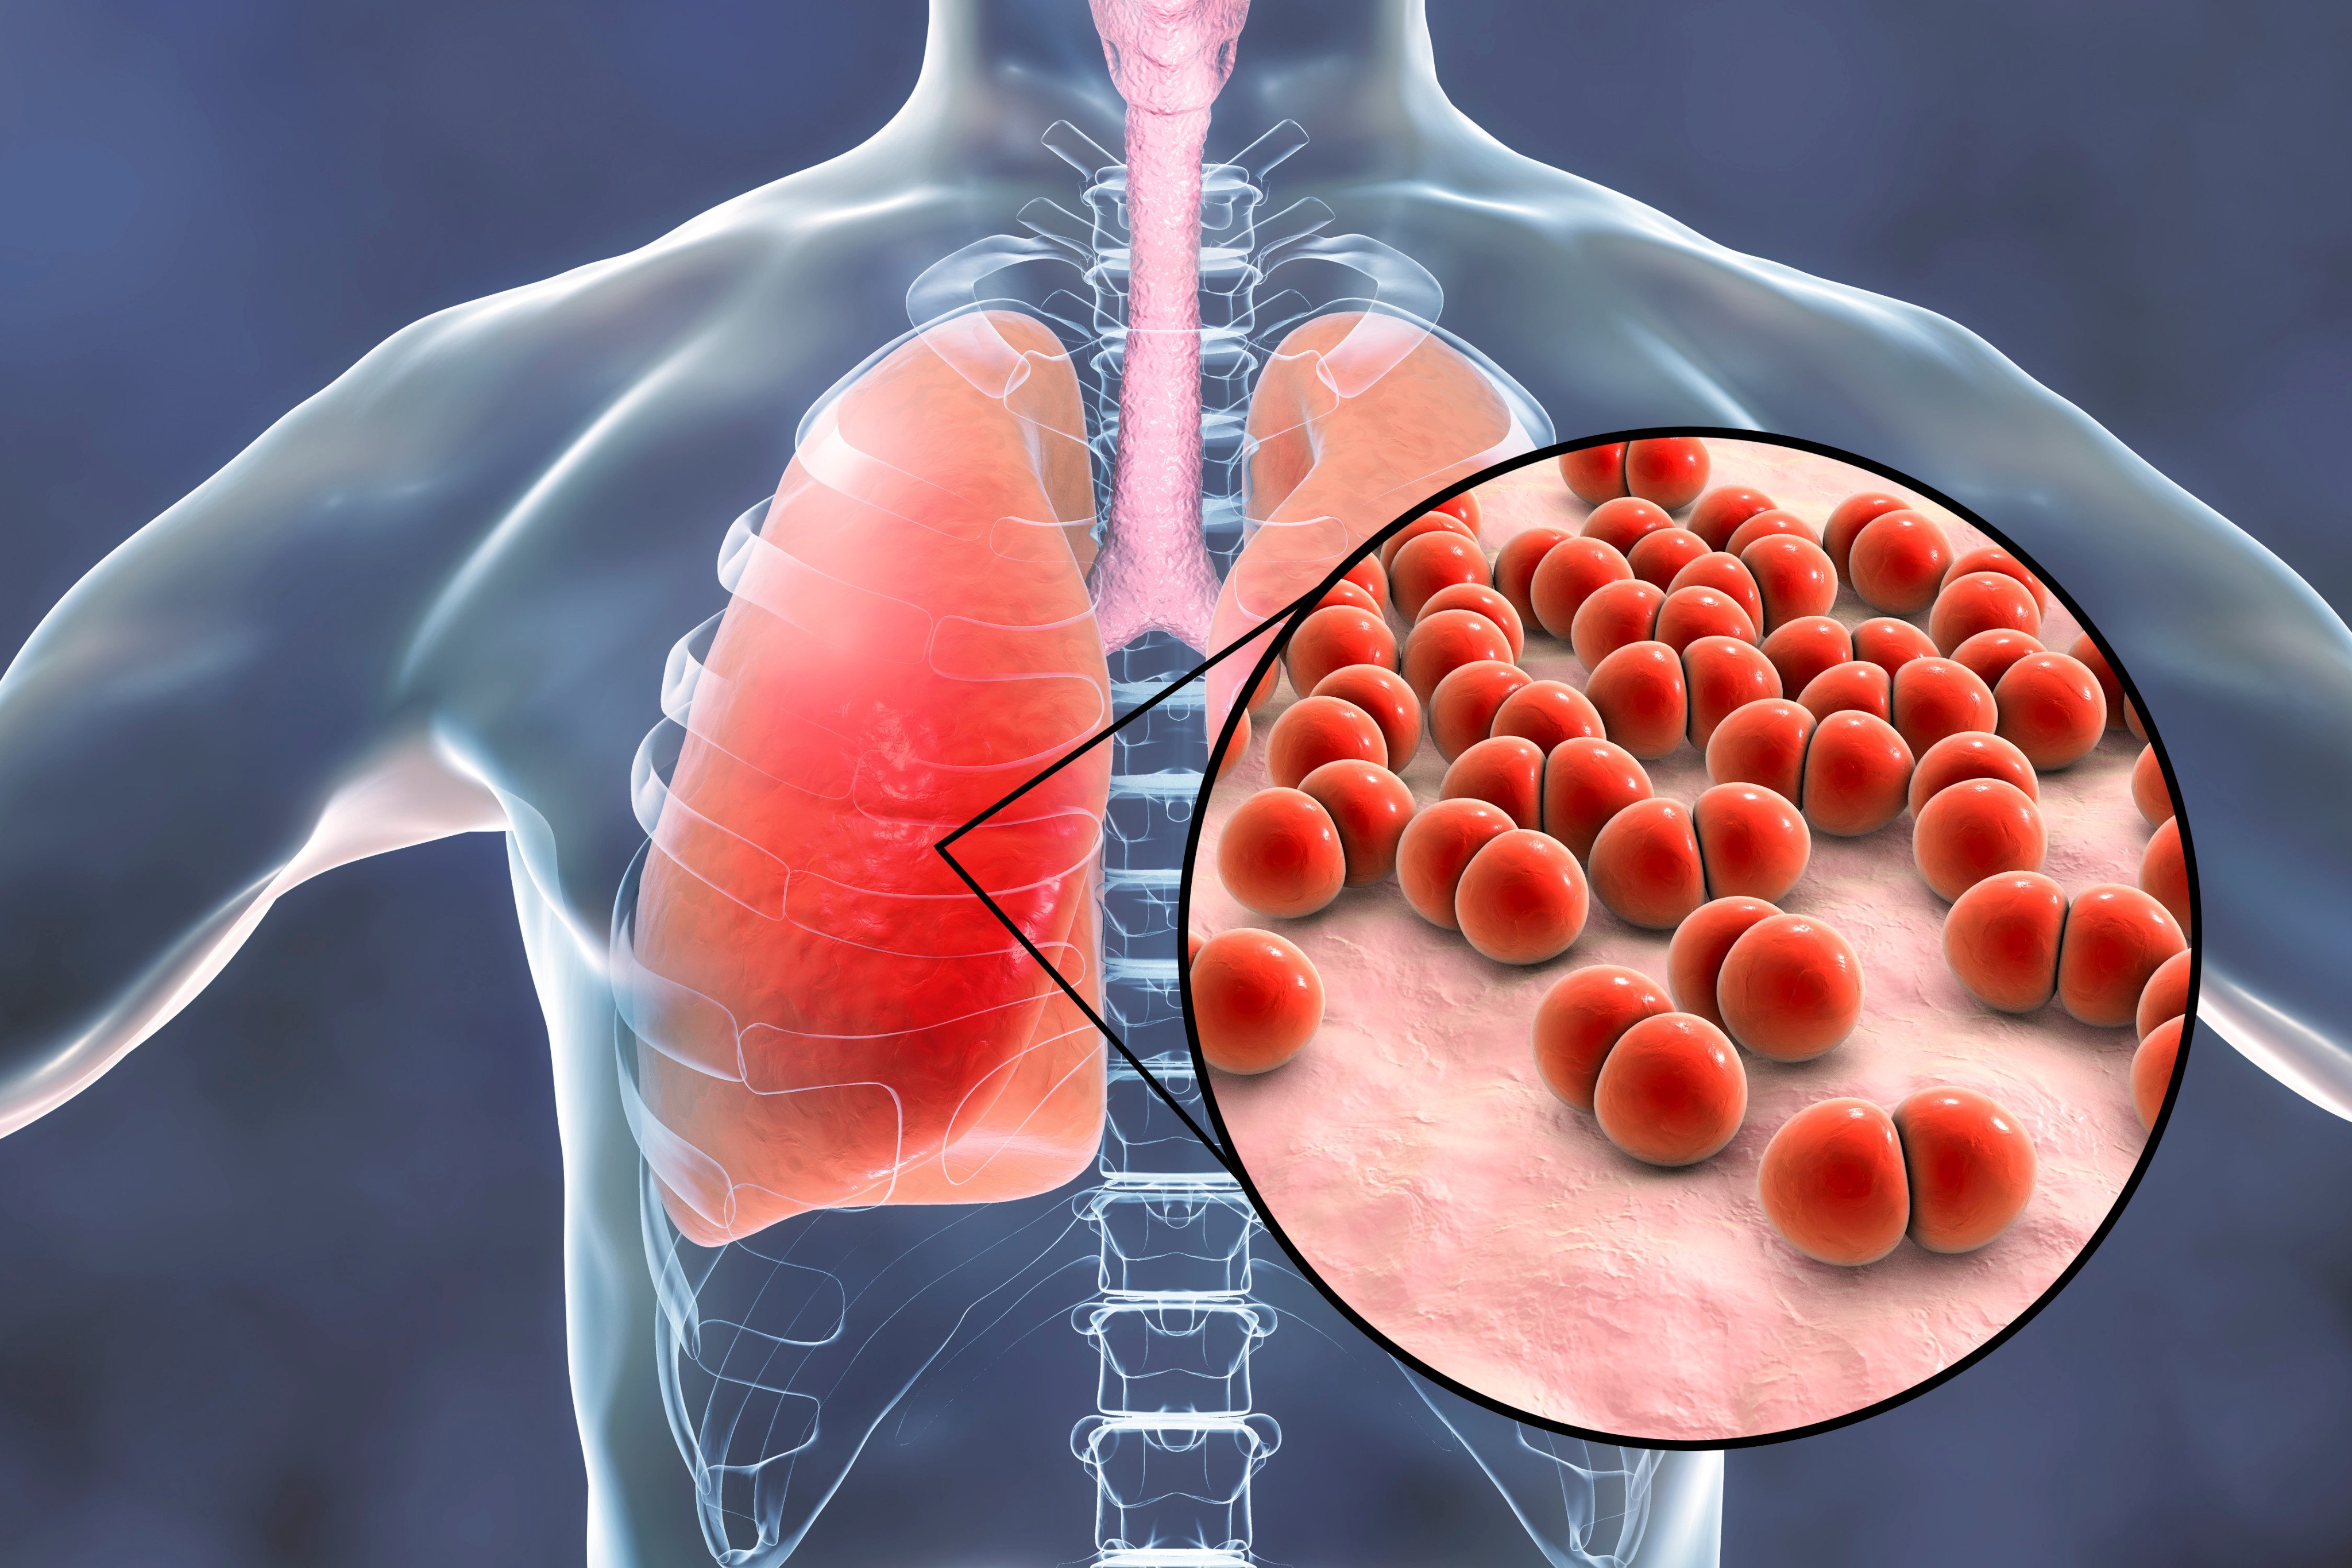 Pneumococcus is a bacteria found in the upper respiratory system and one of the most common causes of pneumonia. Photo: Shutterstock